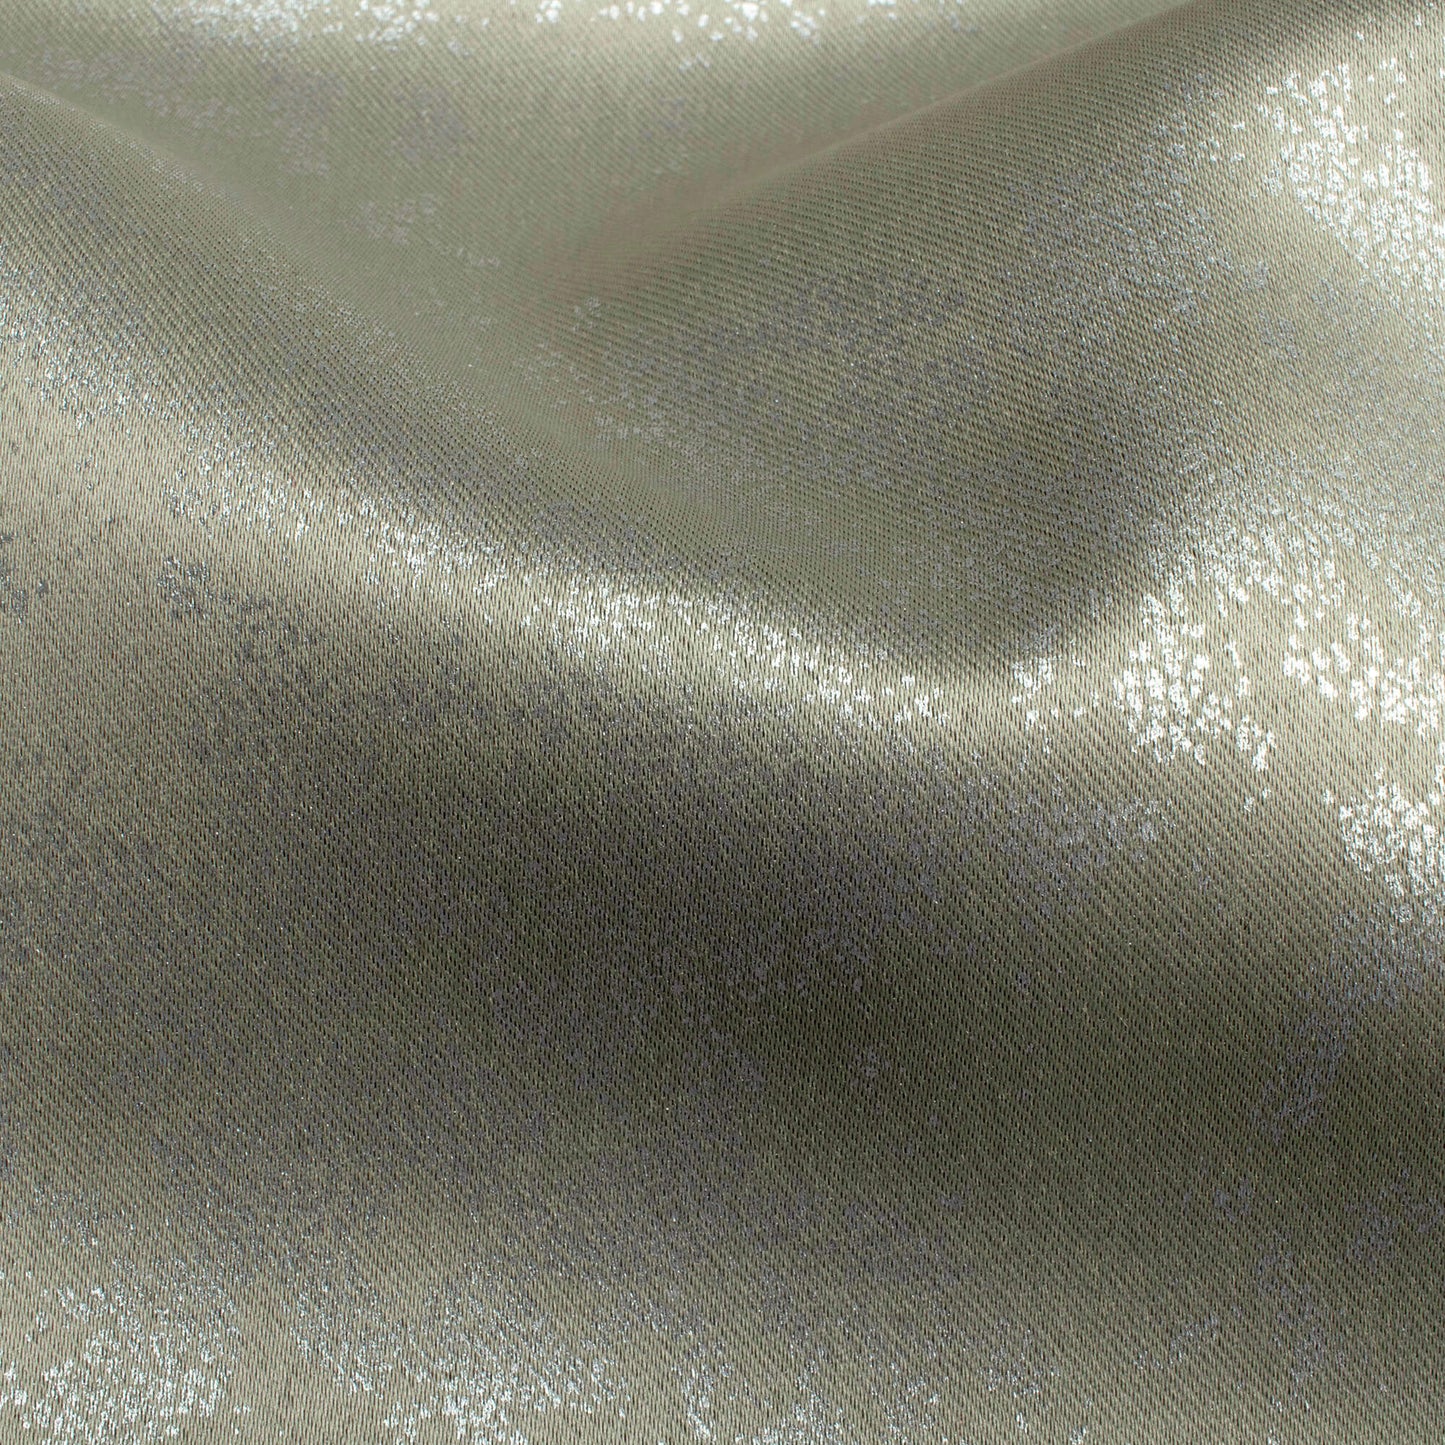 Dolphin Grey Abstract Pattern Silver Foil Premium Curtain Fabric (Width 54 Inches)